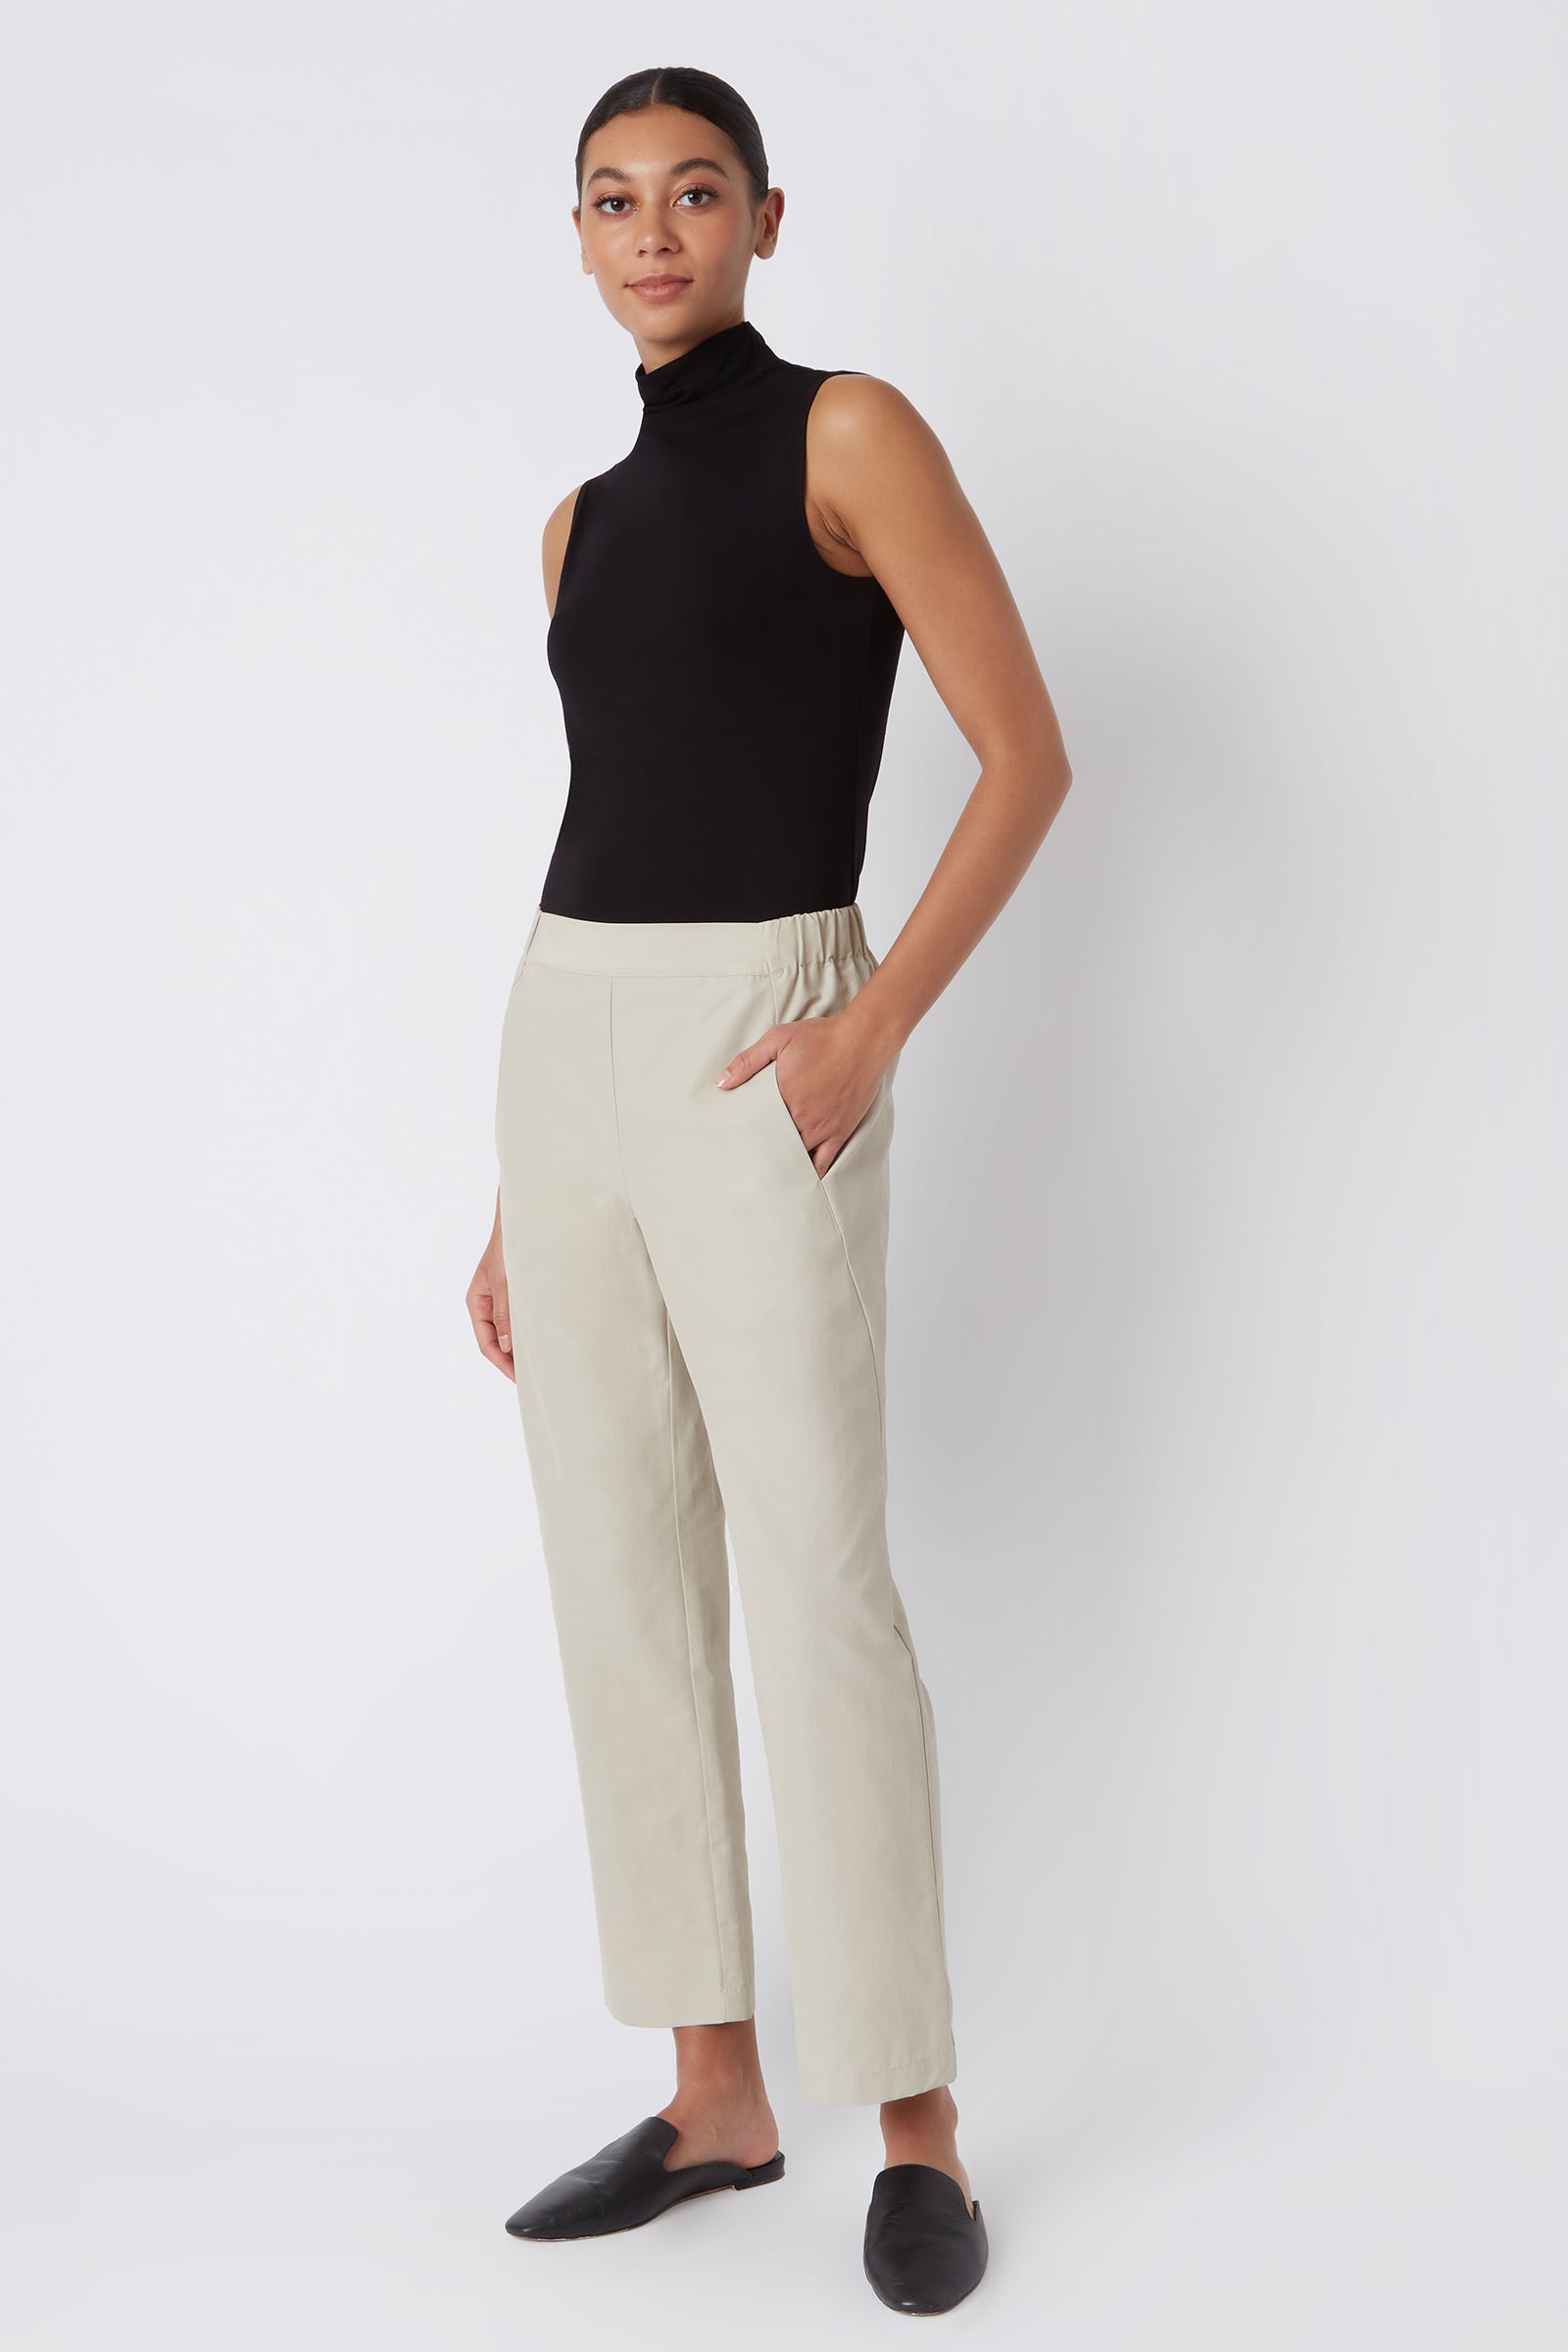 Kal Rieman Brit Crop Pant in Classic Khaki on Model with Hand in Pocket Full Front View